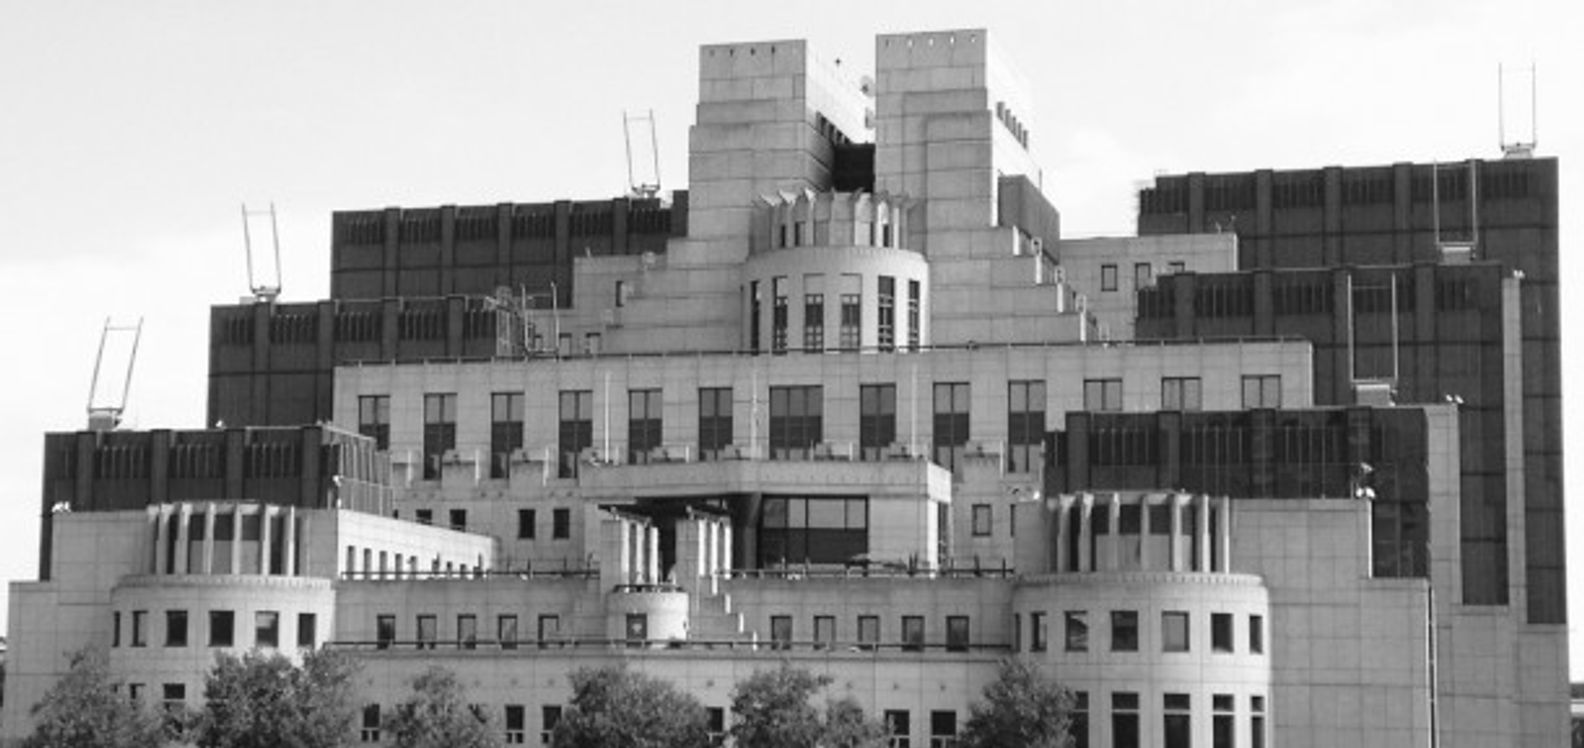 Black and White image of concrete buildings 